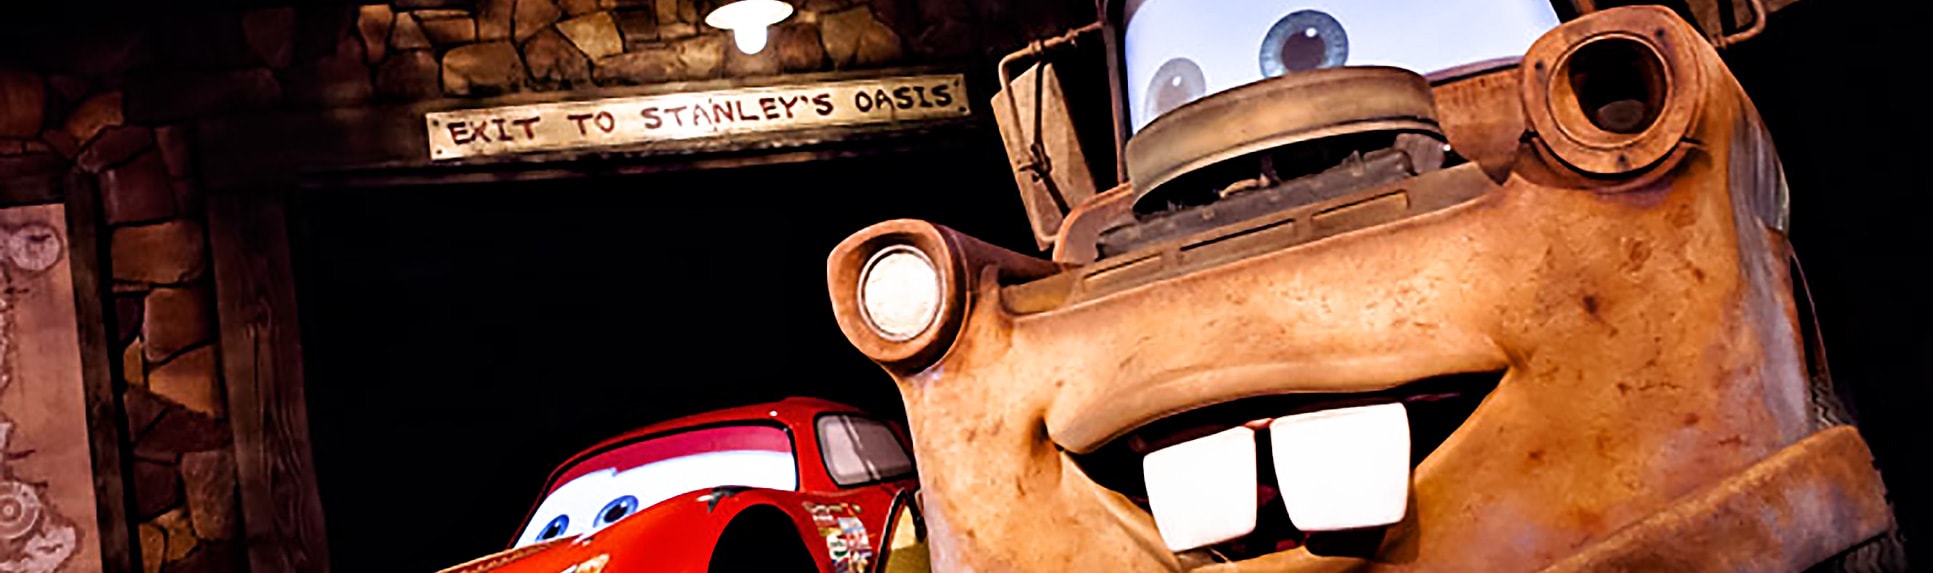 Lightning McQueen and Mater in the Radiator Springs Racers attraction